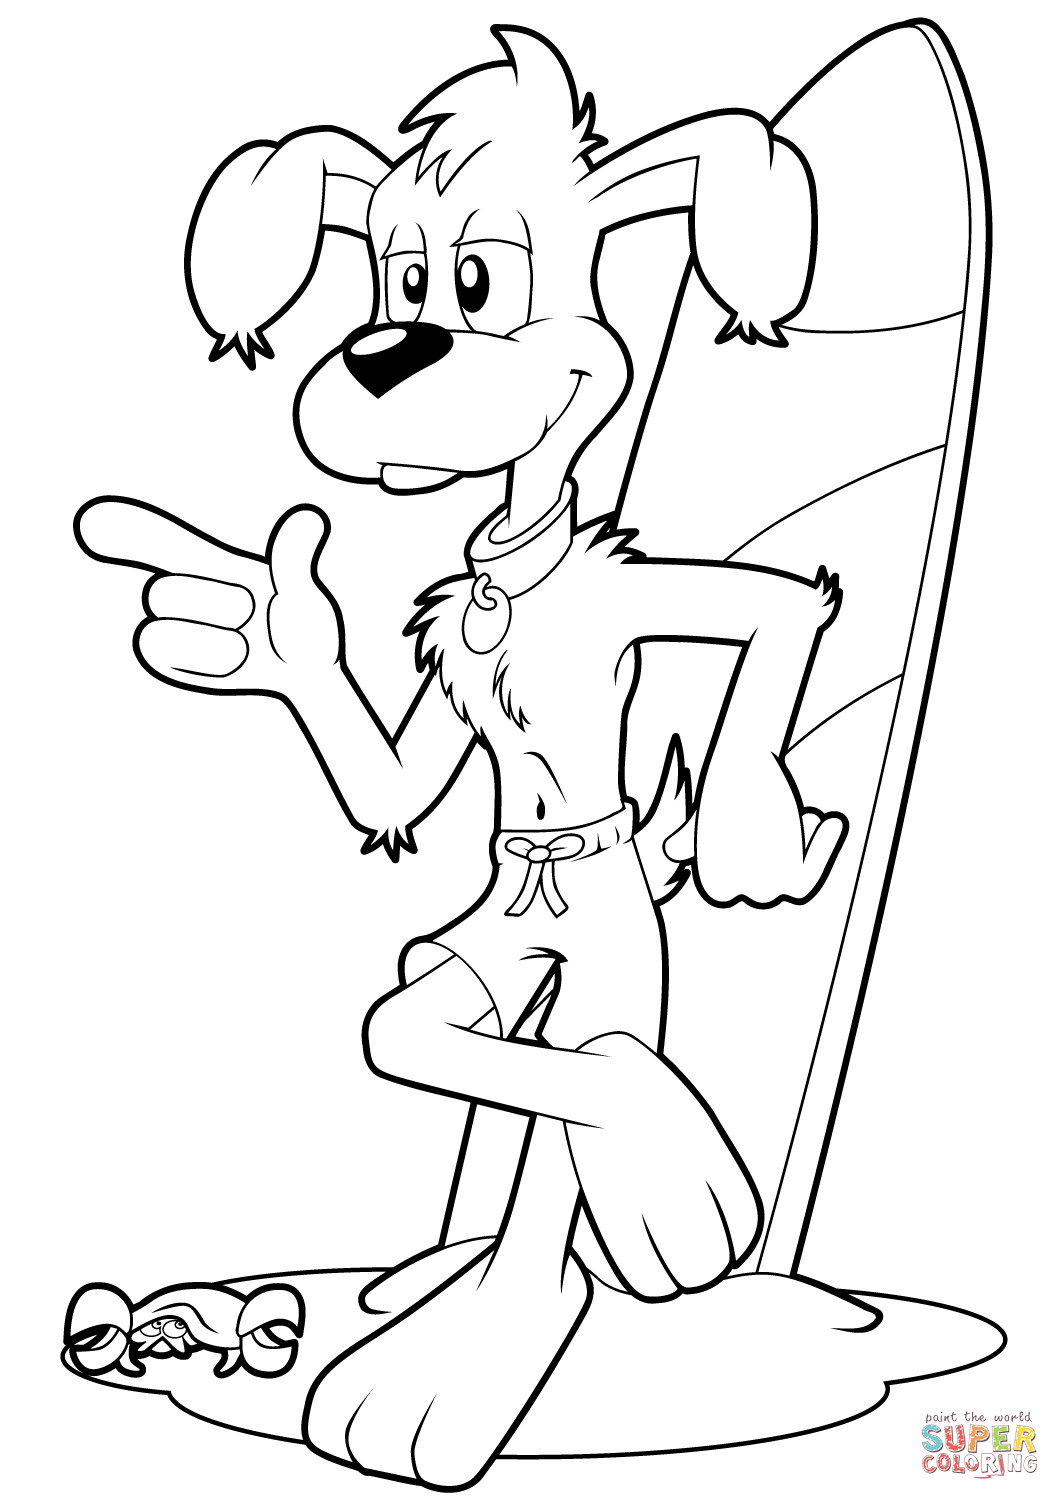 Surfing Coloring Pages
 Cool Cartoon Dog Surfer coloring page